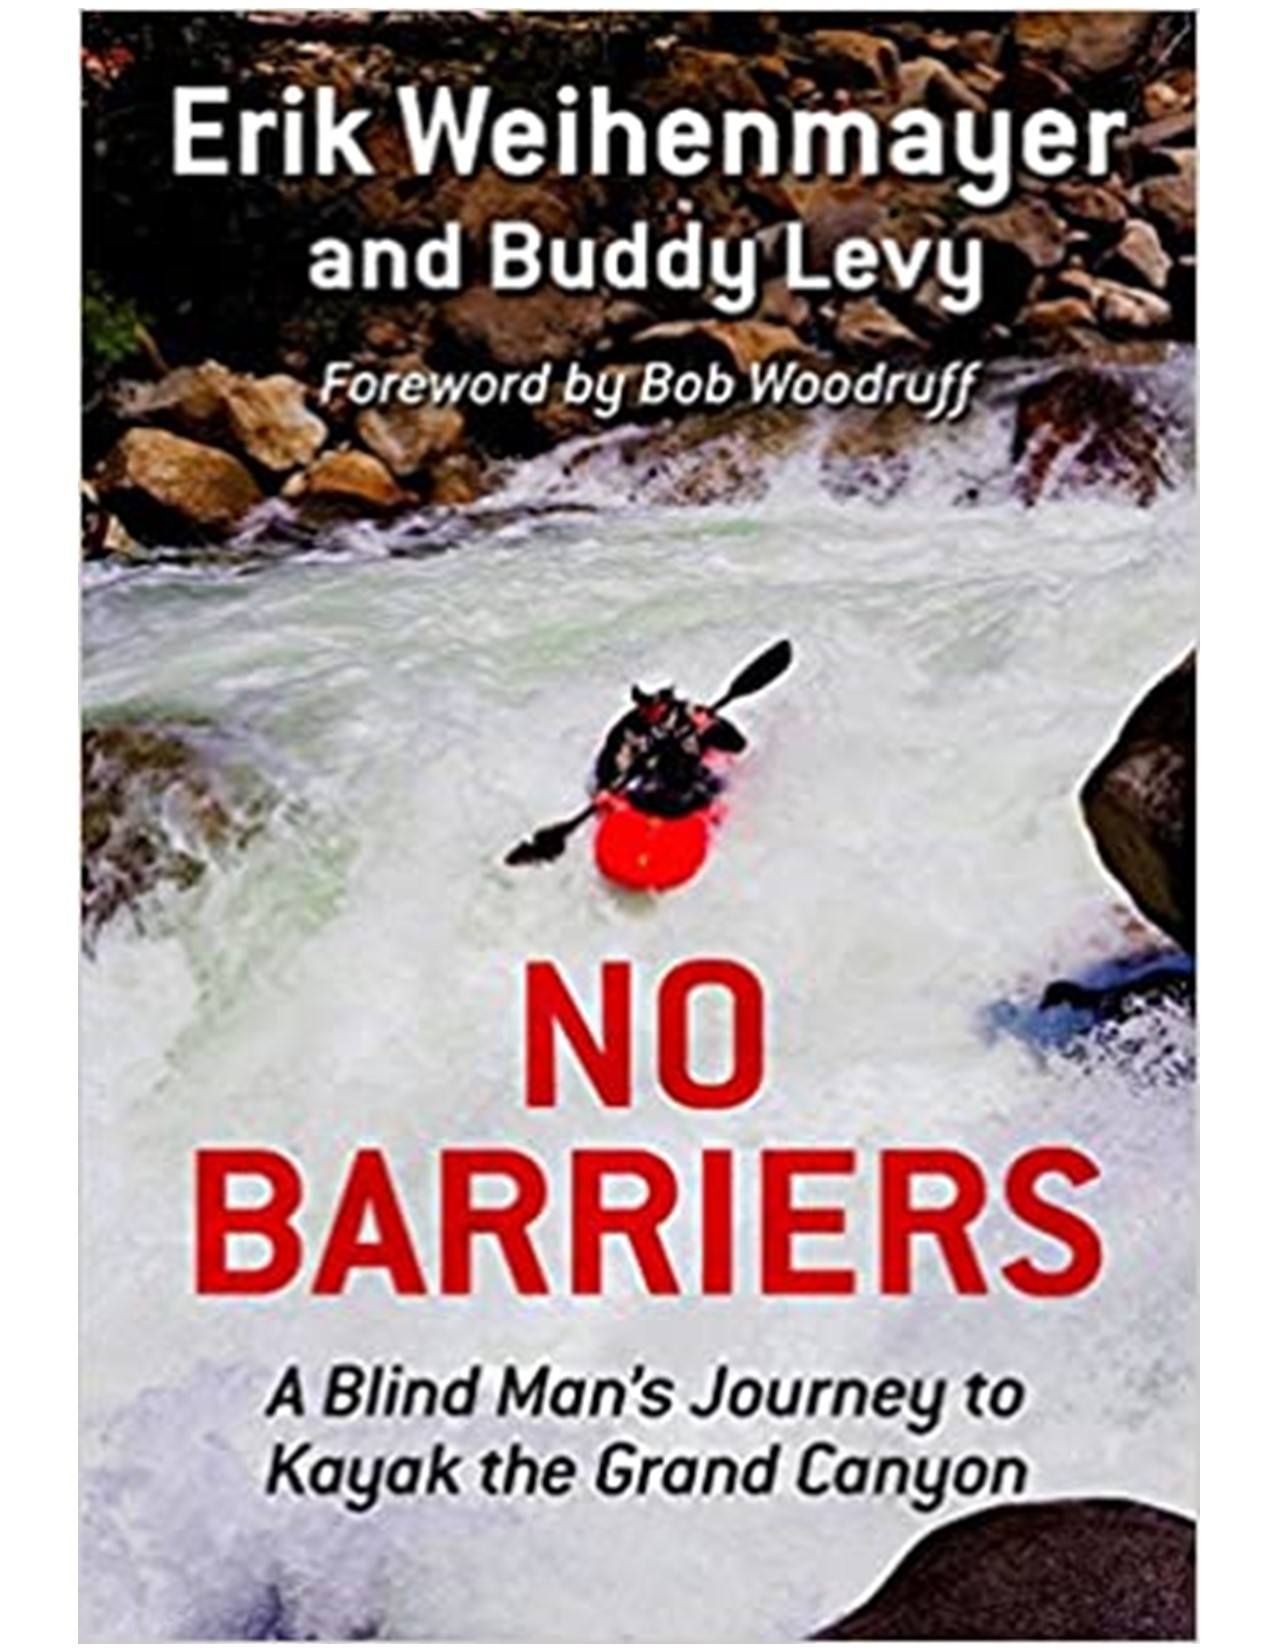 Book cover of No Barriers by Erik Weihenmayer and Buddy Levy